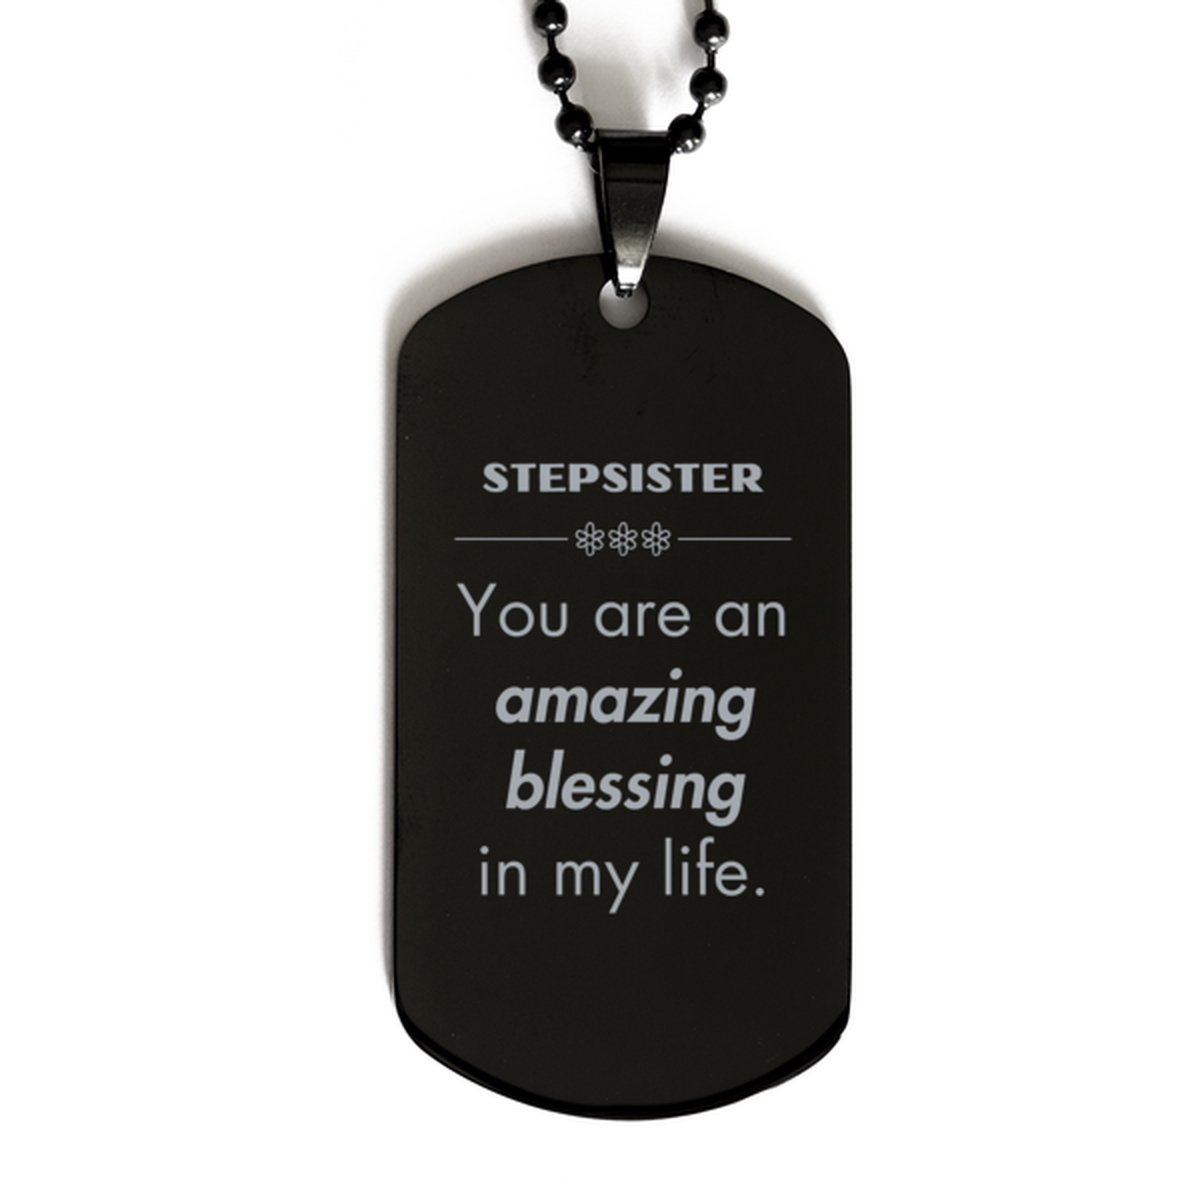 Stepsister Black Dog Tag, You are an amazing blessing in my life, Thank You Gifts For Stepsister, Inspirational Birthday Christmas Unique Gifts For Stepsister